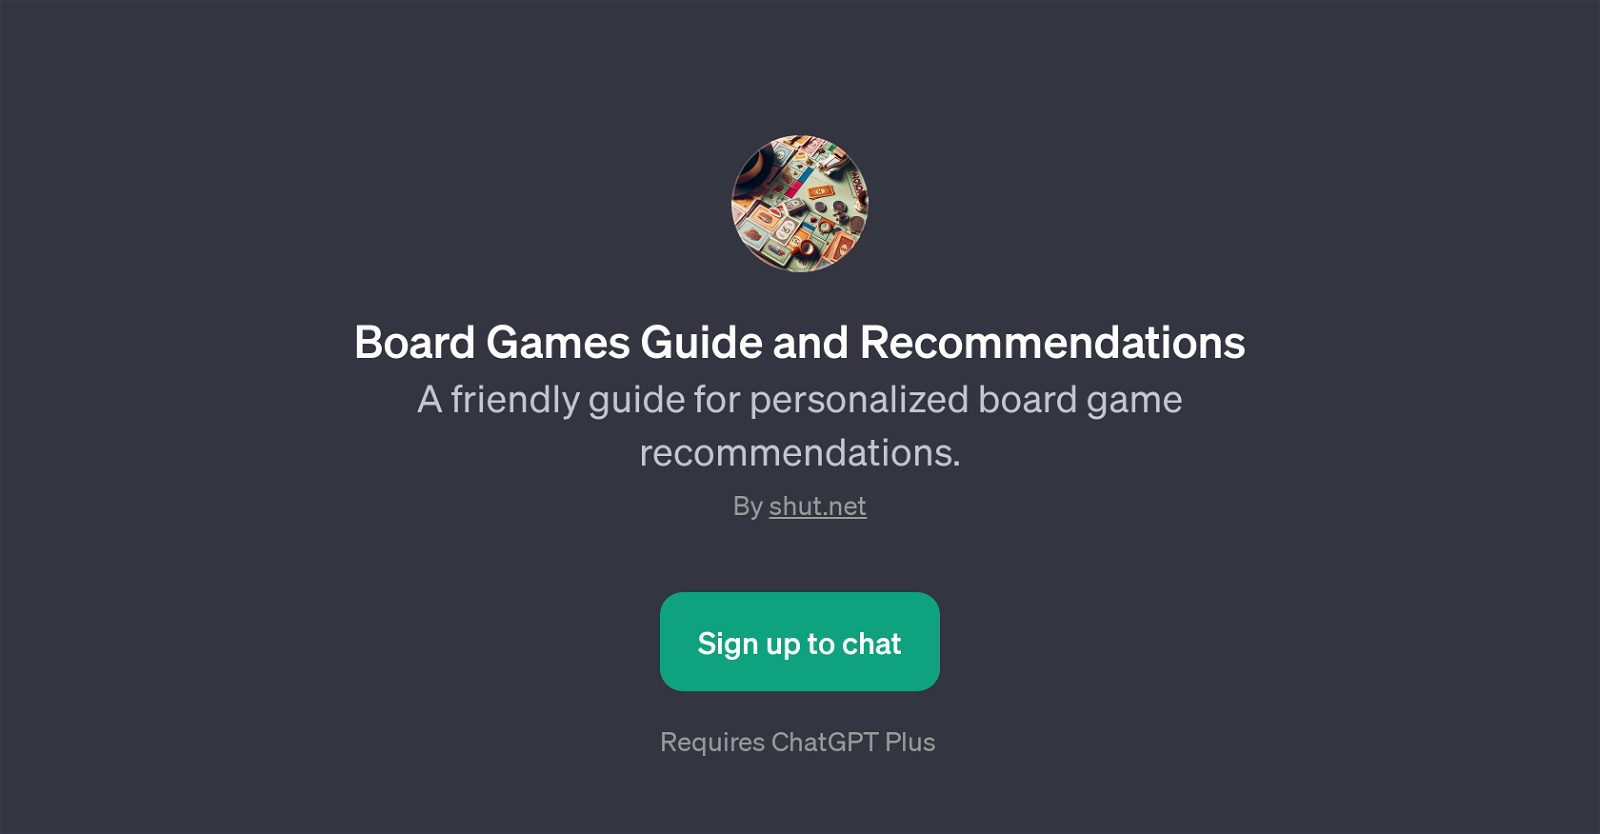 Board Games Guide and Recommendations website